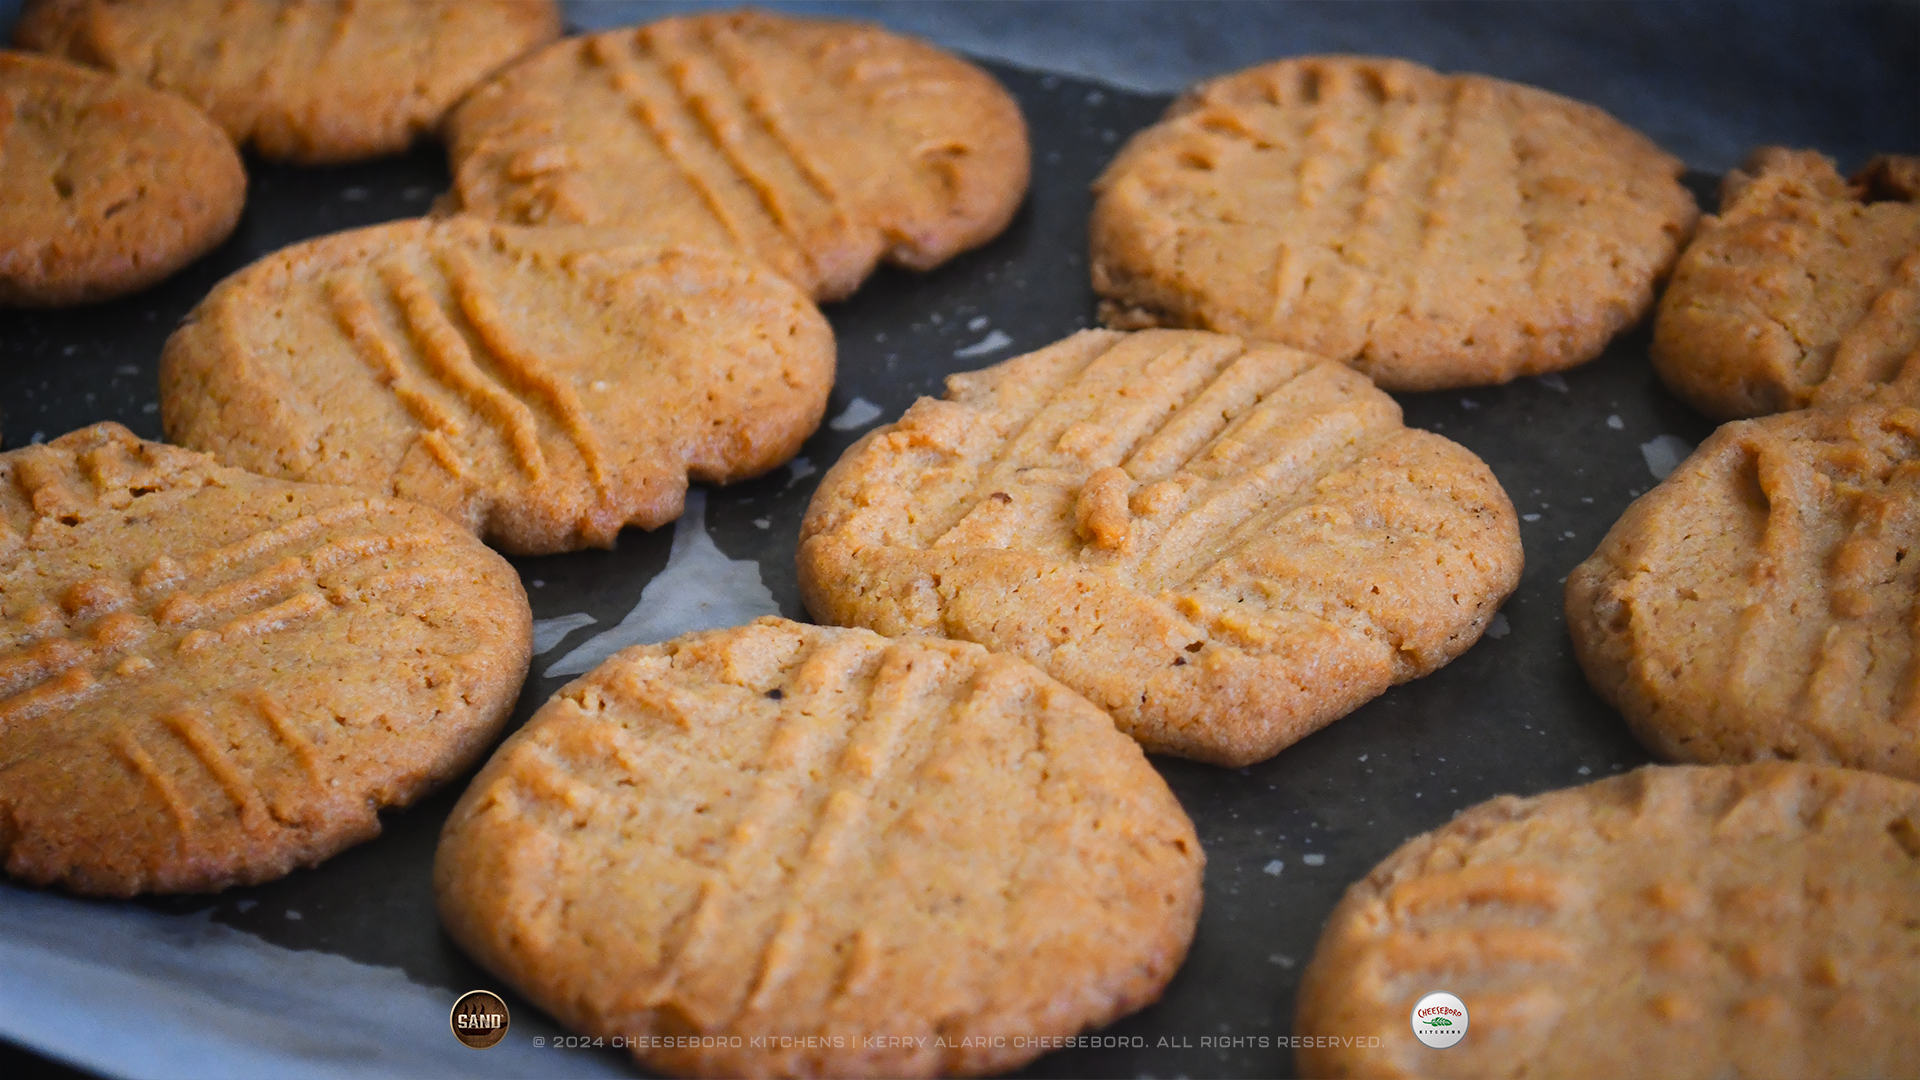 cheeskitch-240124-sand-sweet-spiced-iced-peanut-butter-cookies-baked-tray-1-1920-hor.png